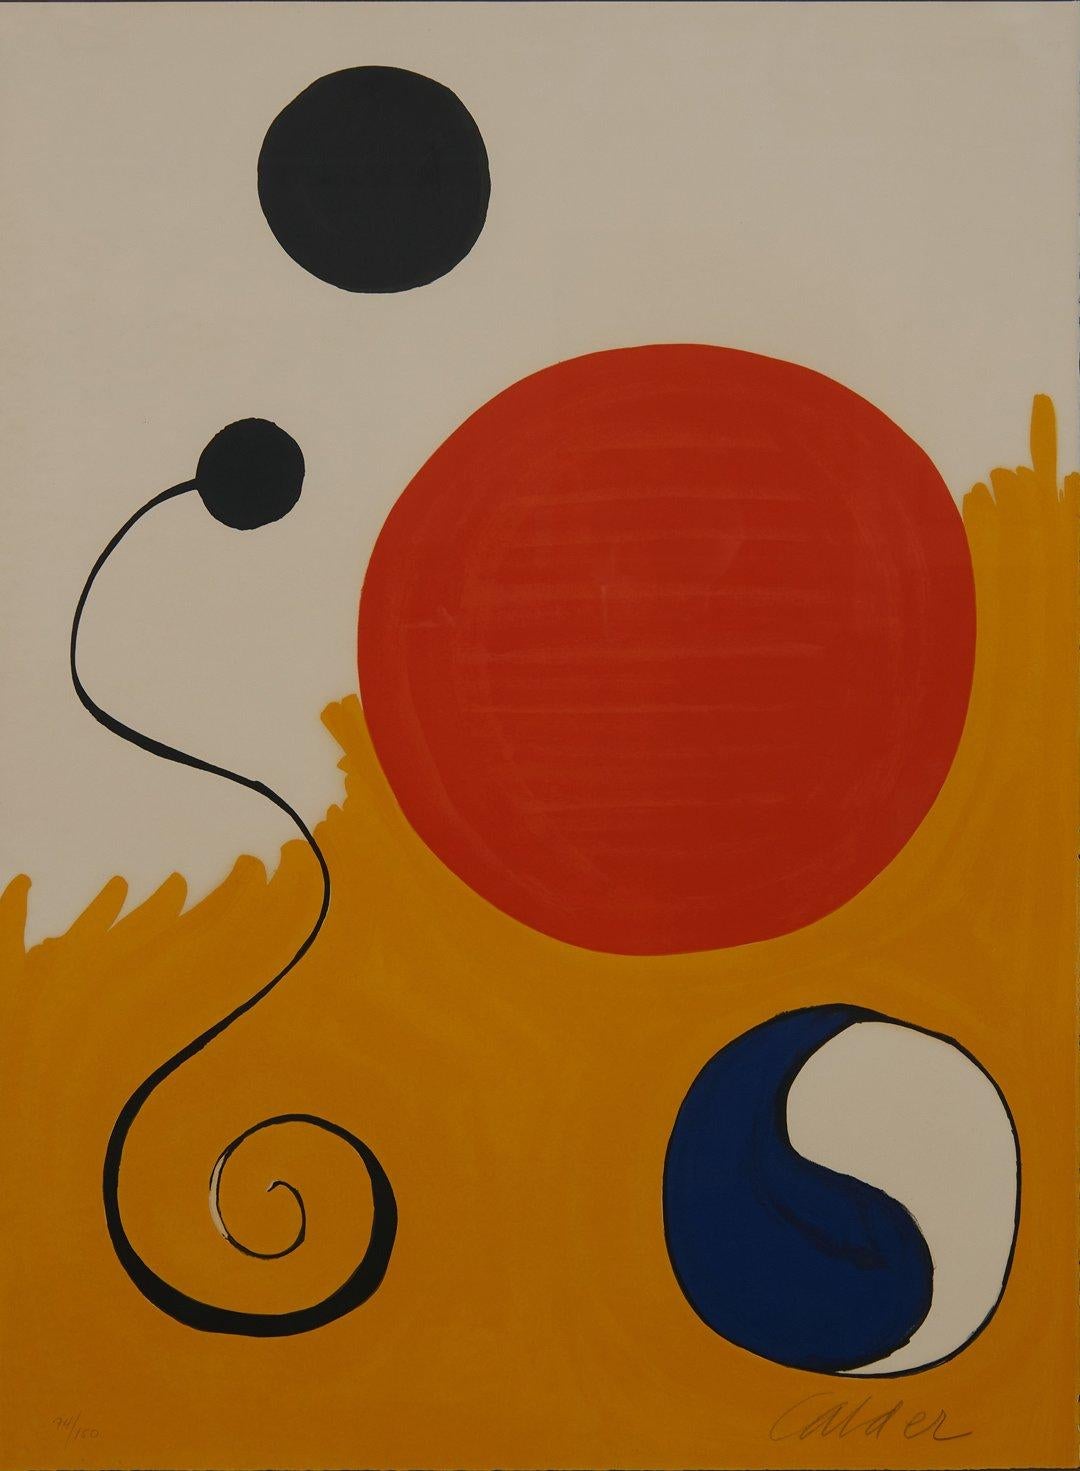 Alexander Calder Figurative Print - Red Sphere on Yellow Ground, mid-century modern abstract lithograph